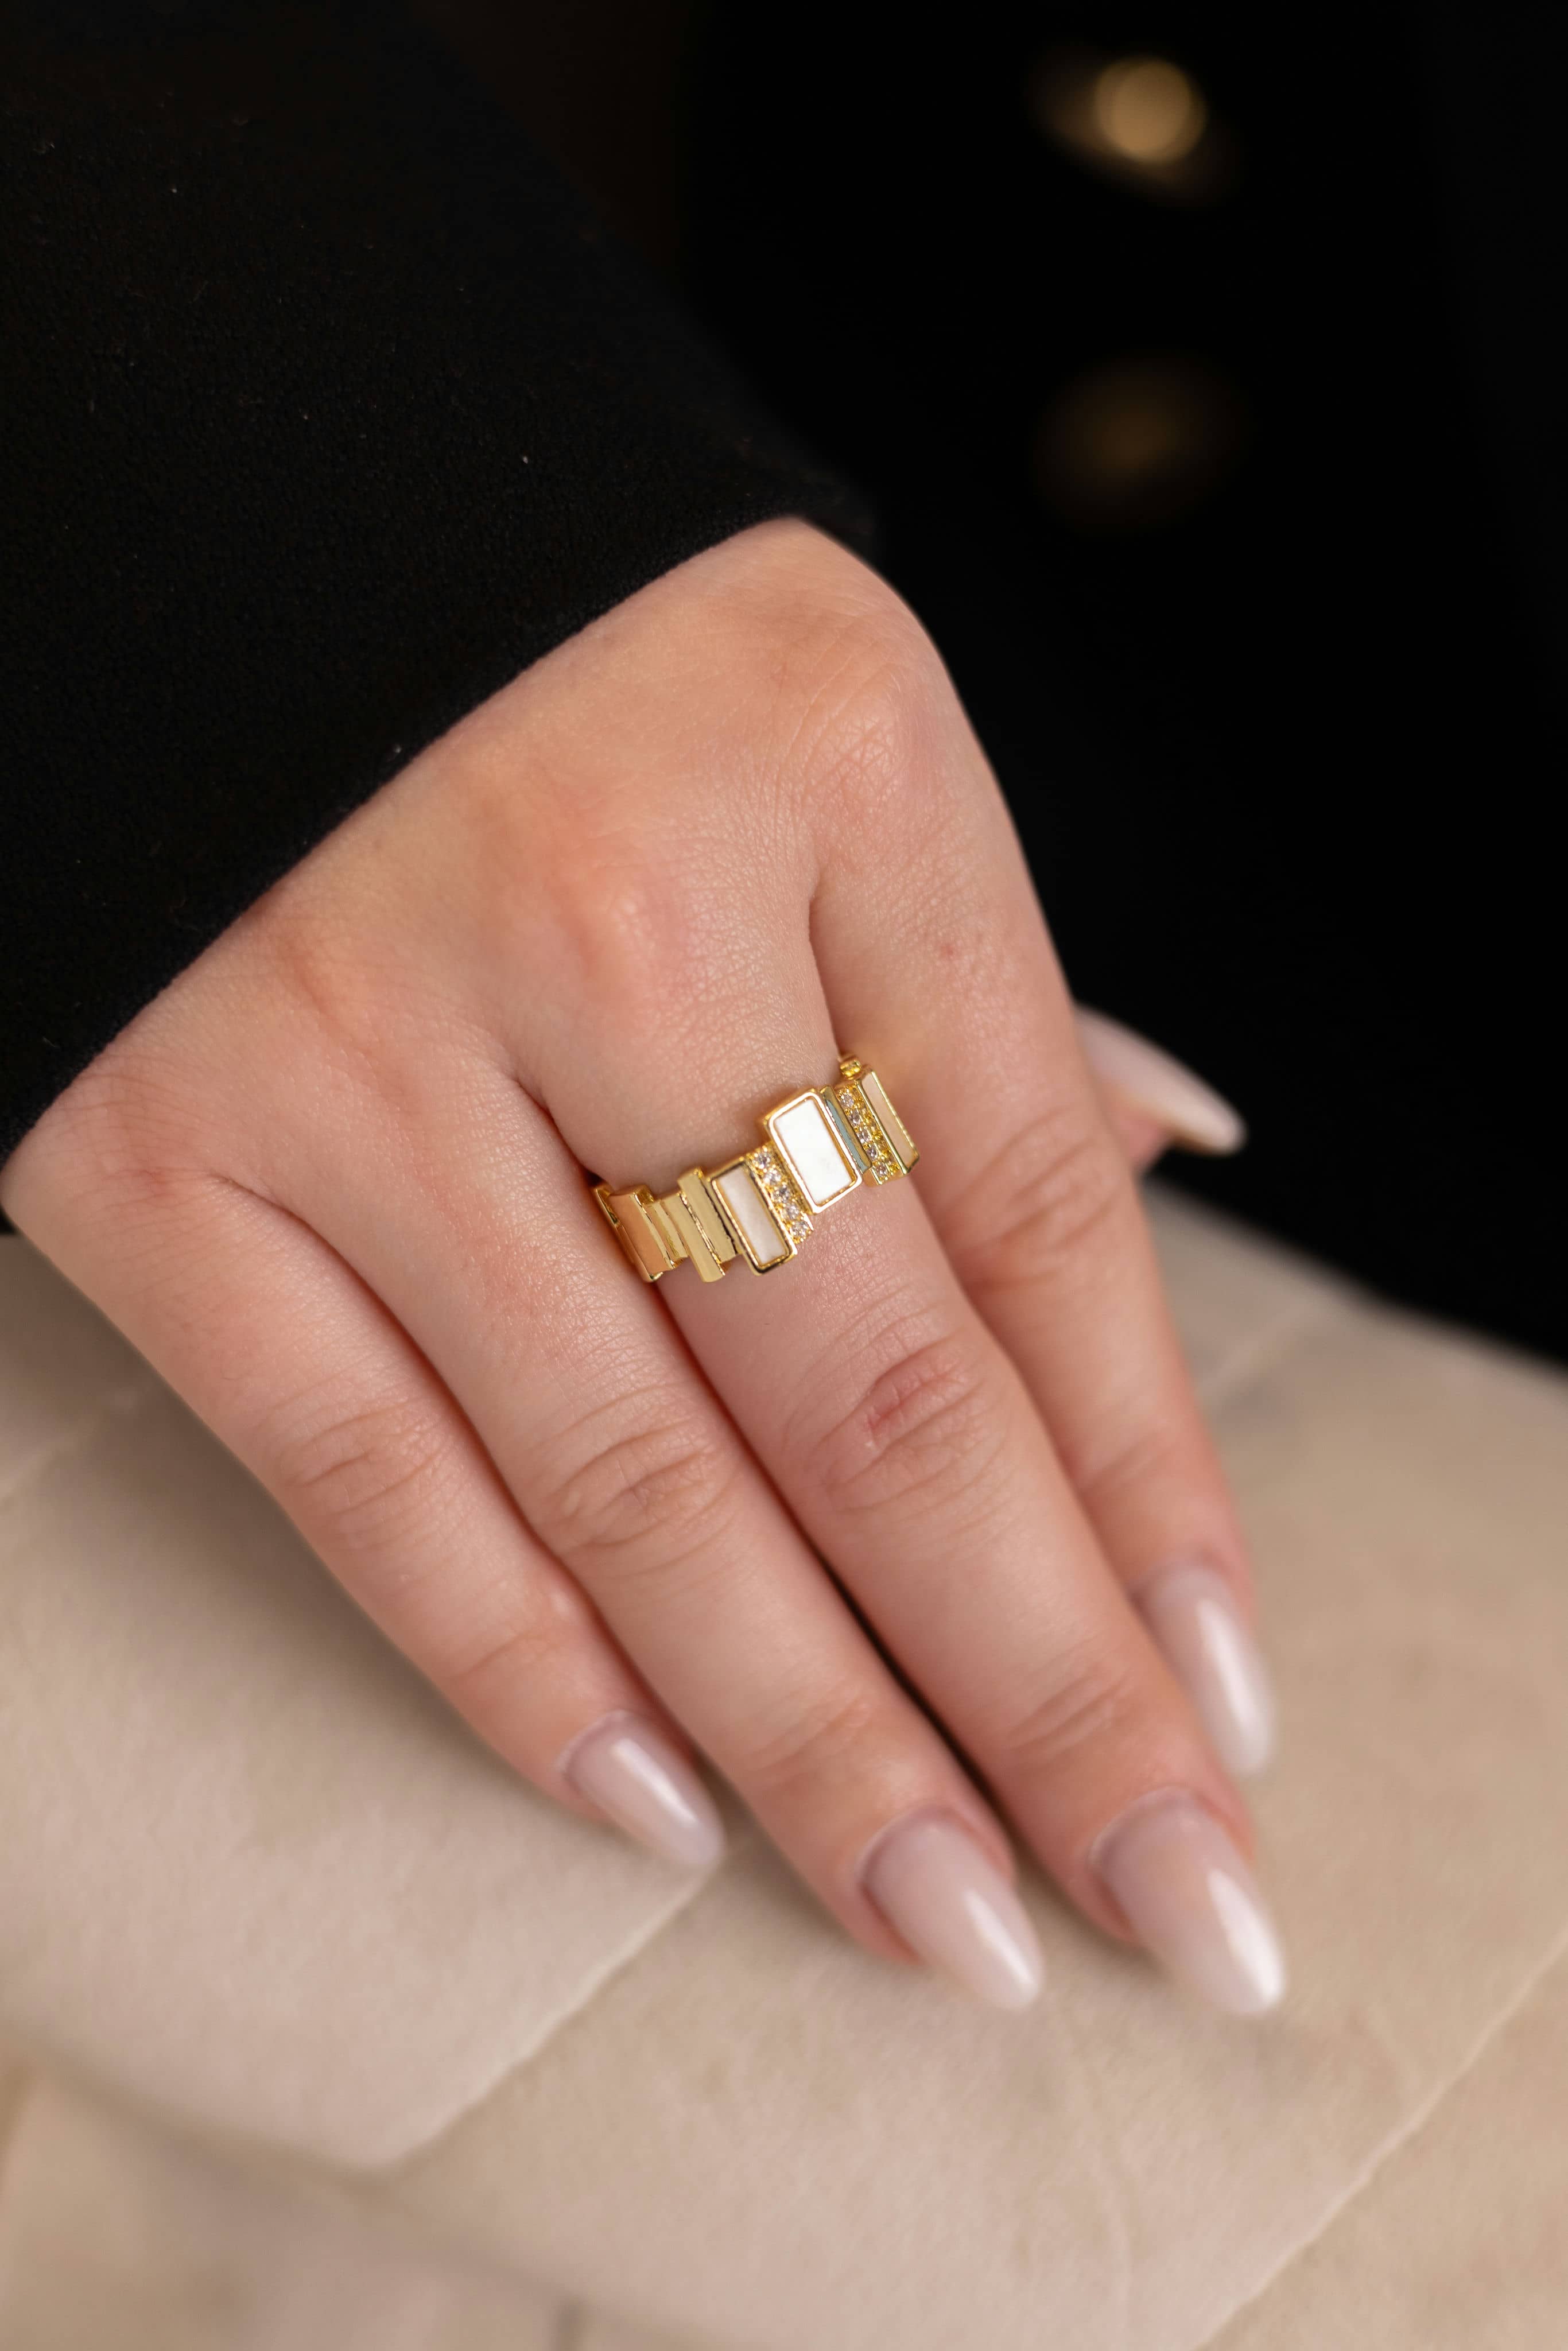 Ring Pearl Gold